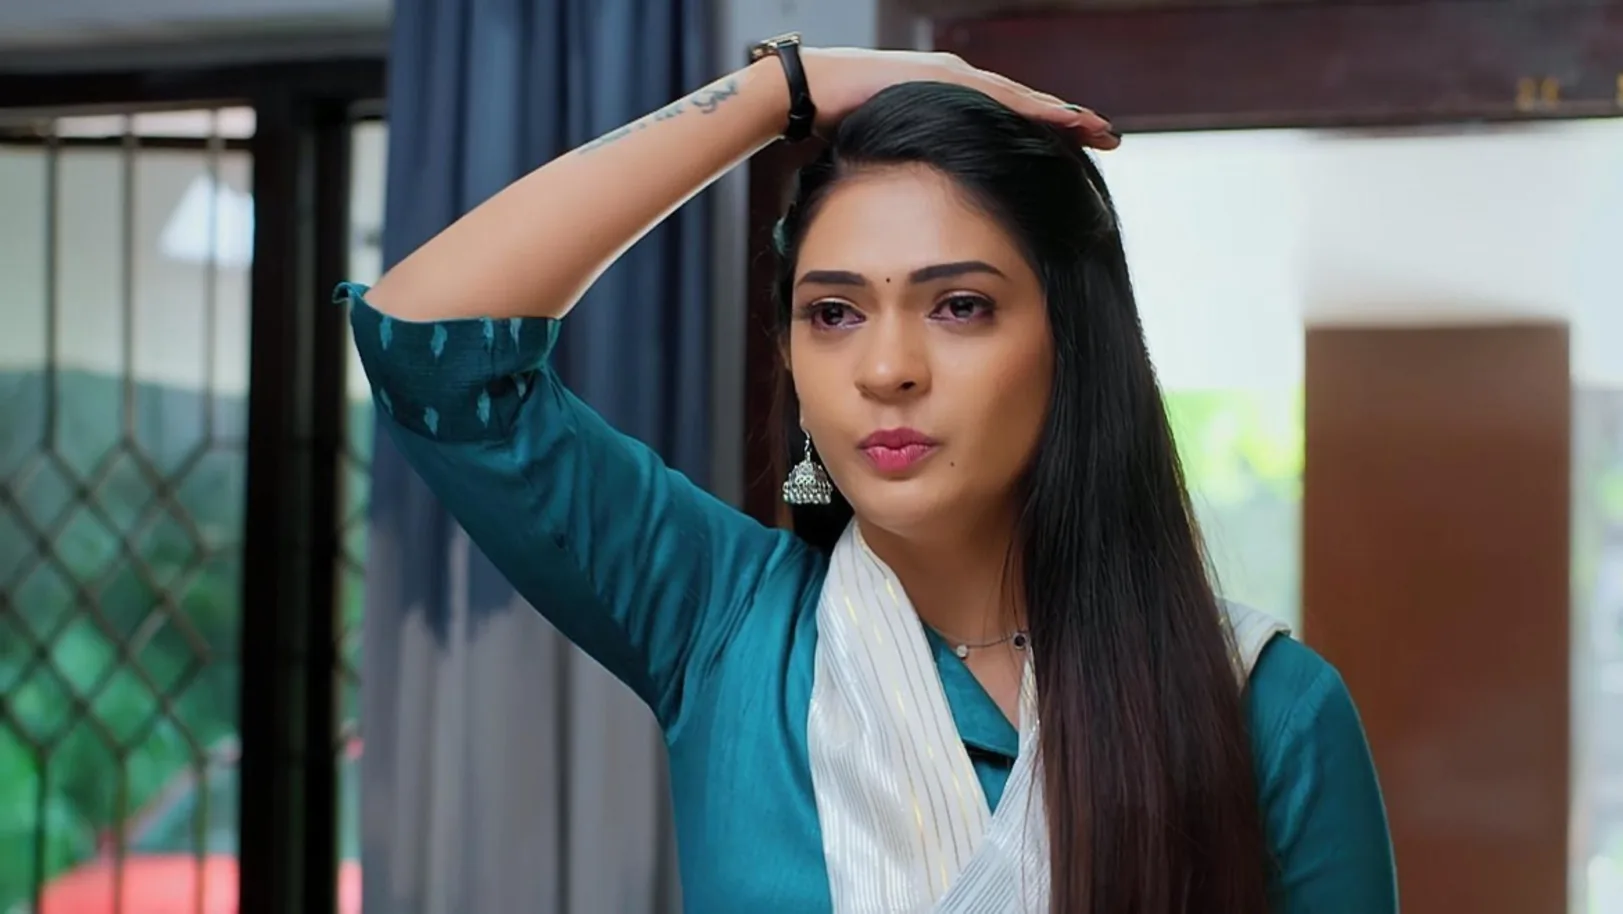 Bhagamati Swears by Her Innocence Episode 136